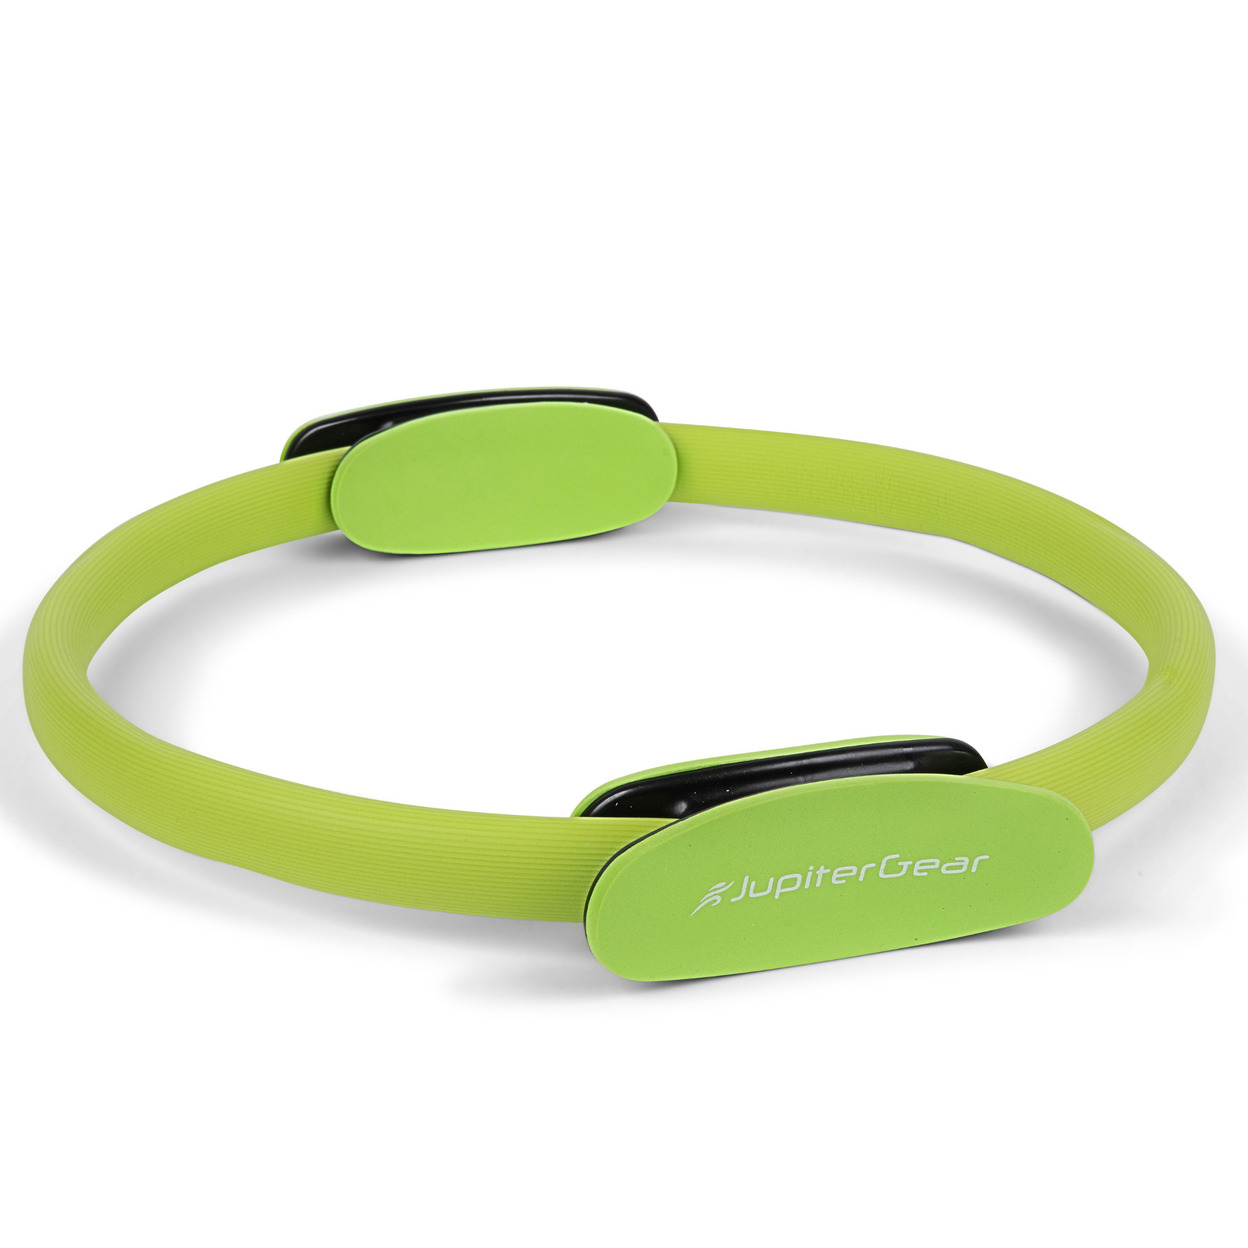 Pilates Resistance Ring For Strengthening Core Muscles - Green